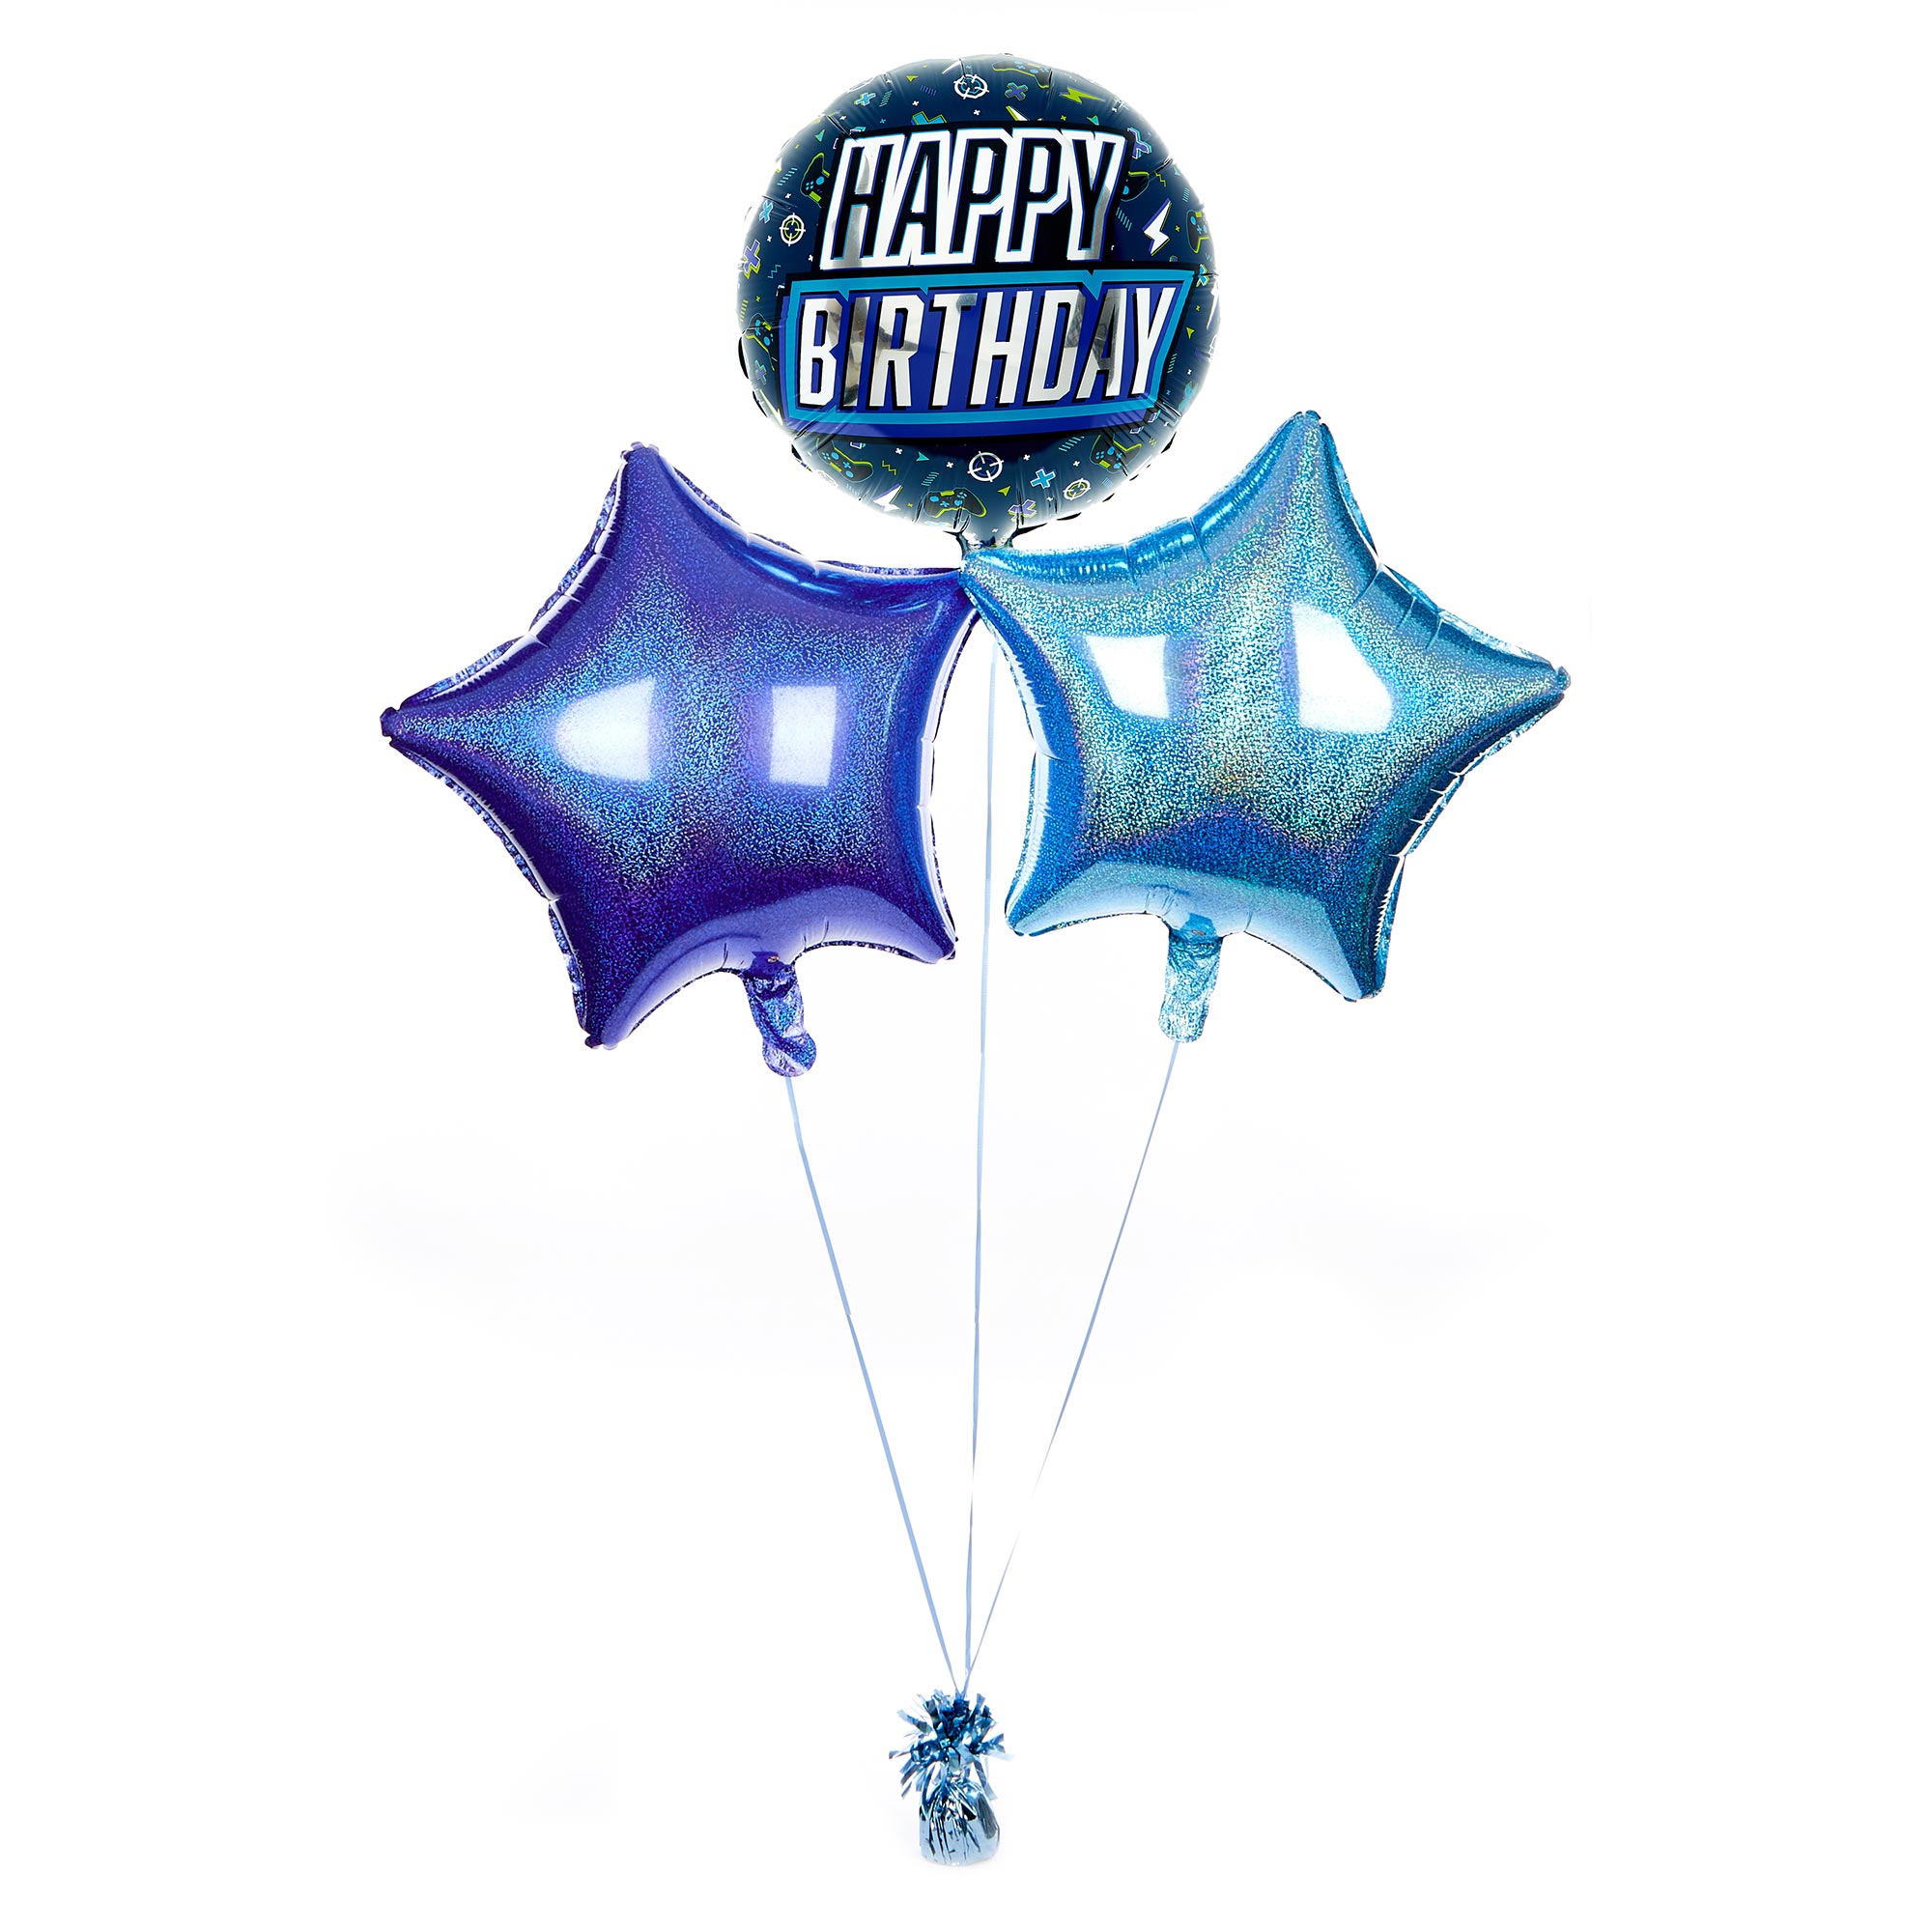 Gaming Happy Birthday Balloon Bouquet - DELIVERED INFLATED!